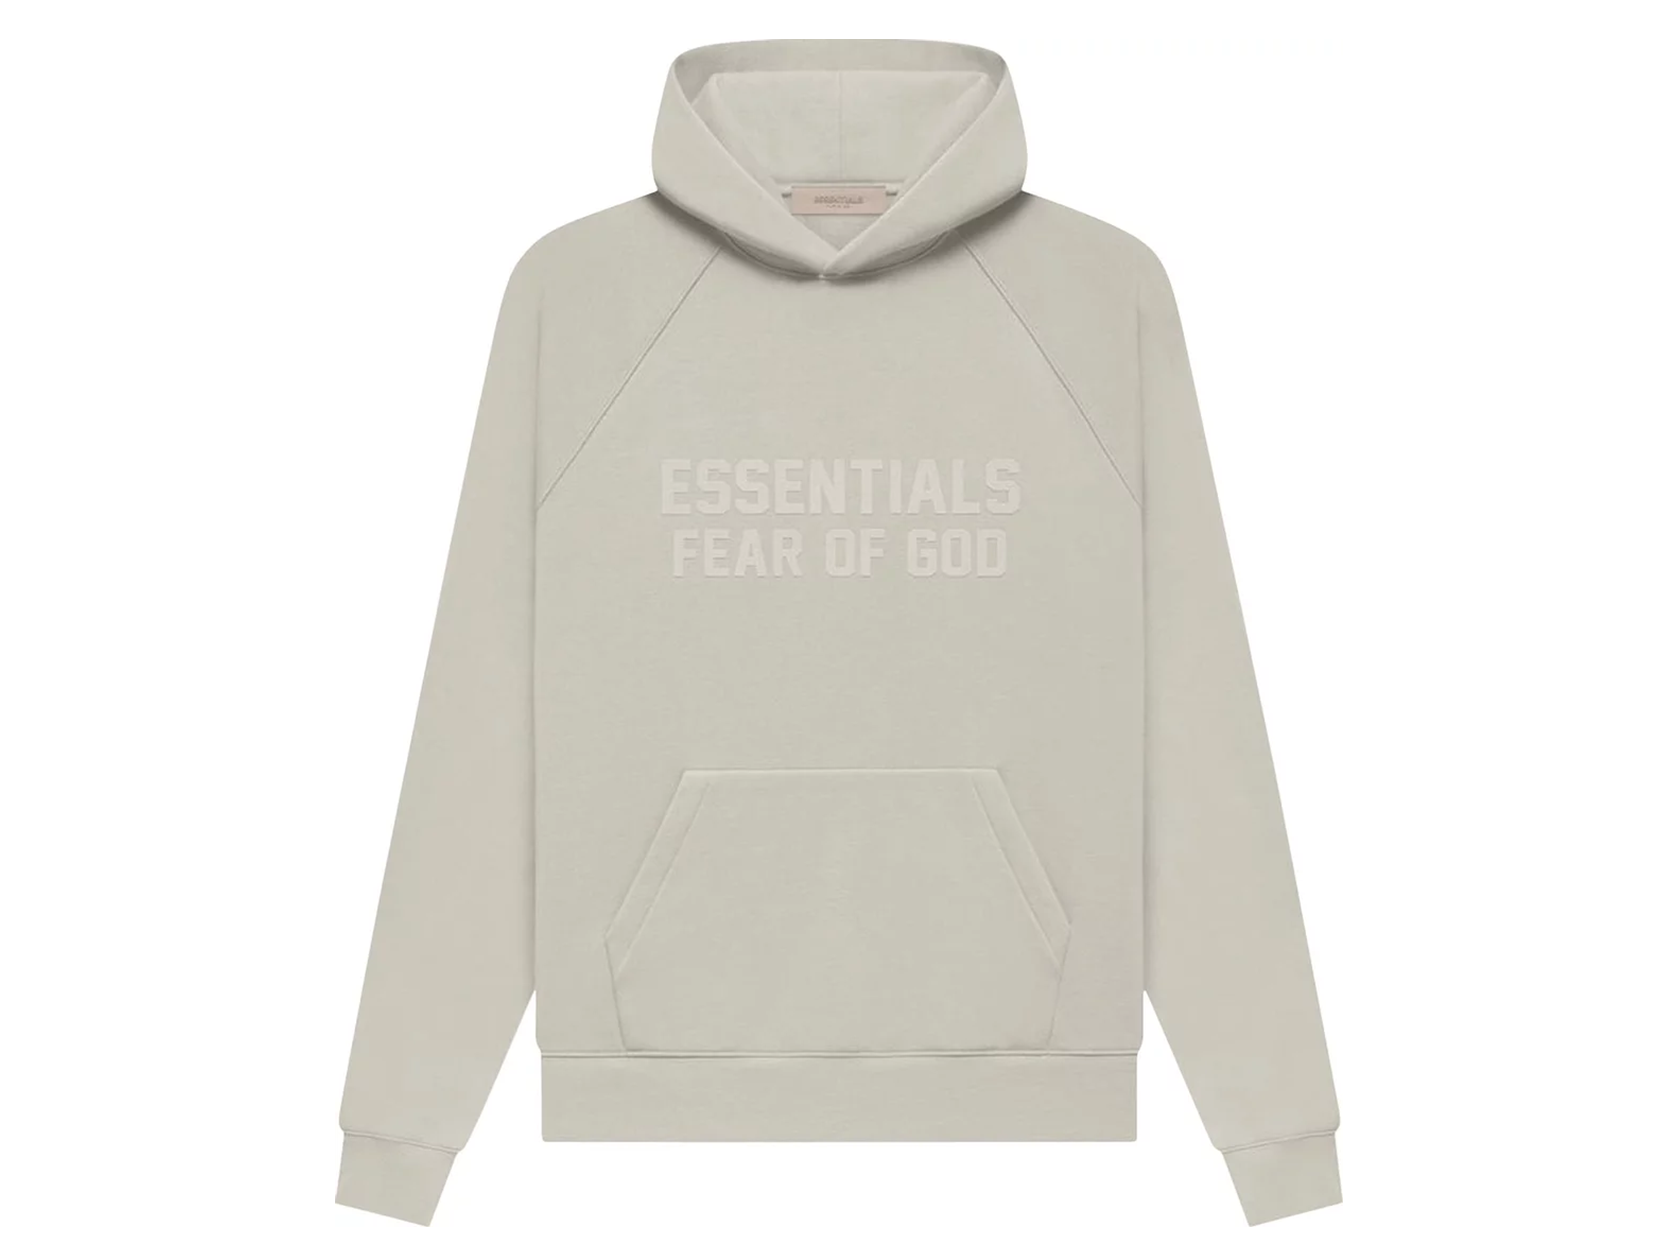 FEAR OF GOD ESSENTIALS SS22 PULLOVER HOODIE SMOKE – Double Boxed